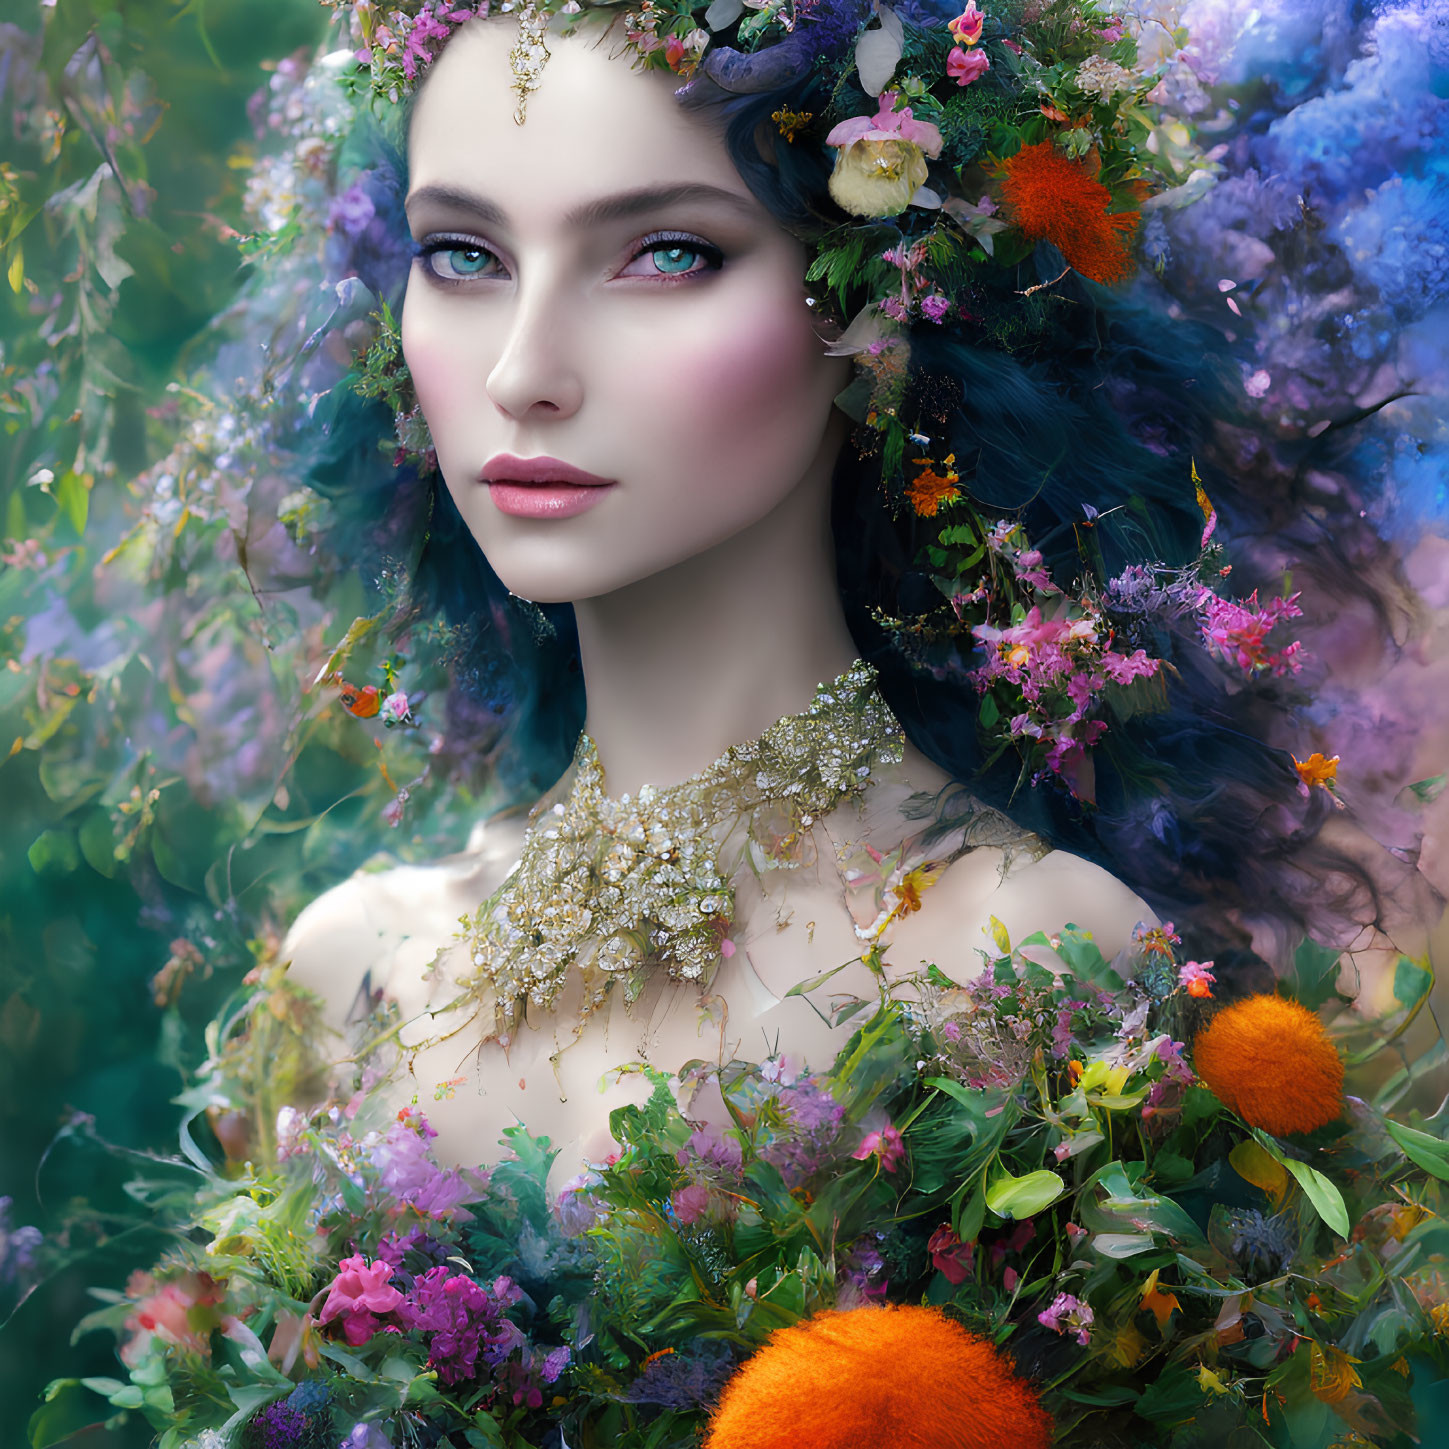 Vibrant blue-eyed woman with floral adornments in lush setting